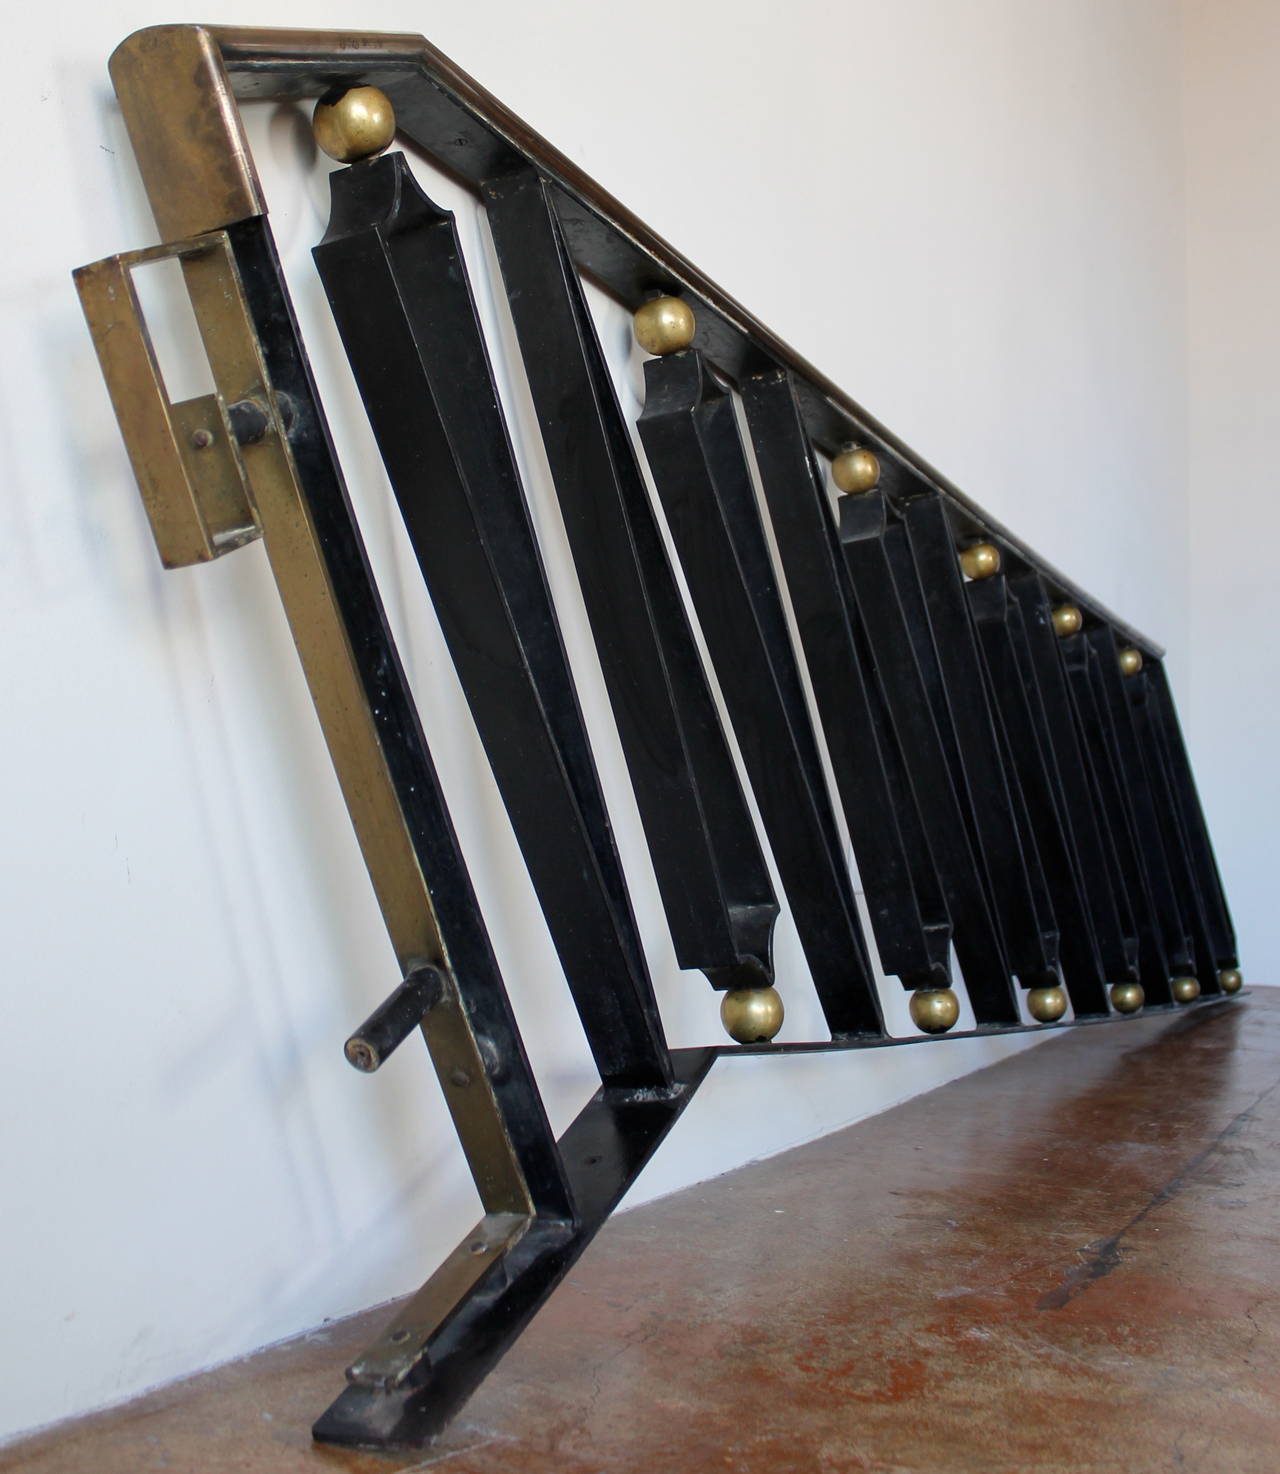 Mexican Forged Iron and Brass Handrail by Arturo Pani, Mexico City 1940s For Sale